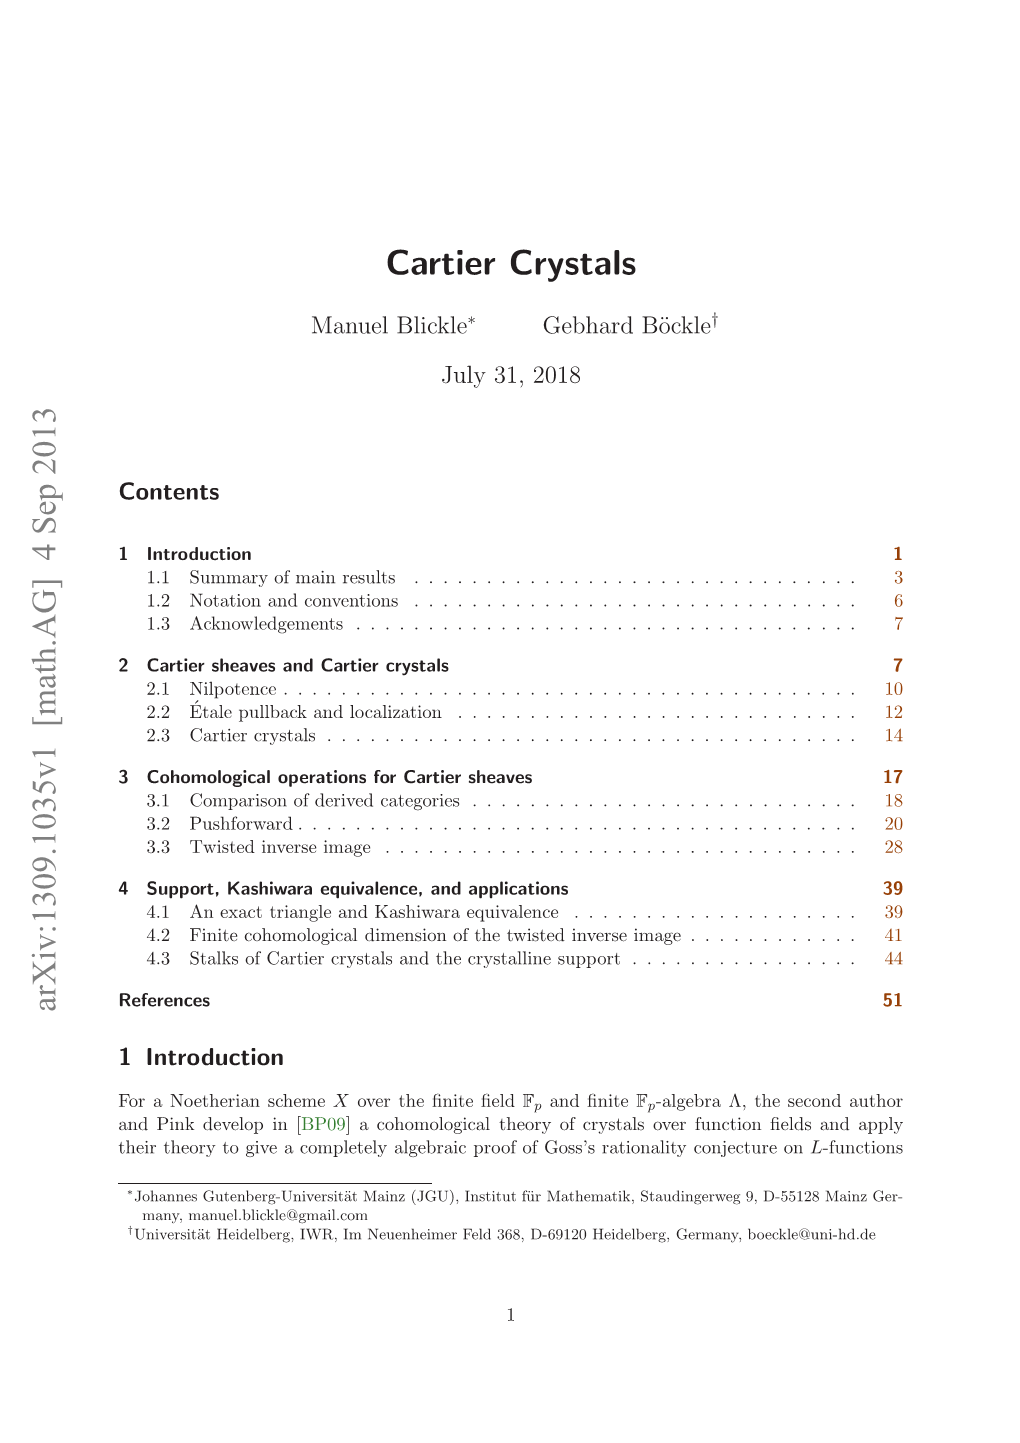 Cartier Crystals in the Case That Λ = Fq, Cf